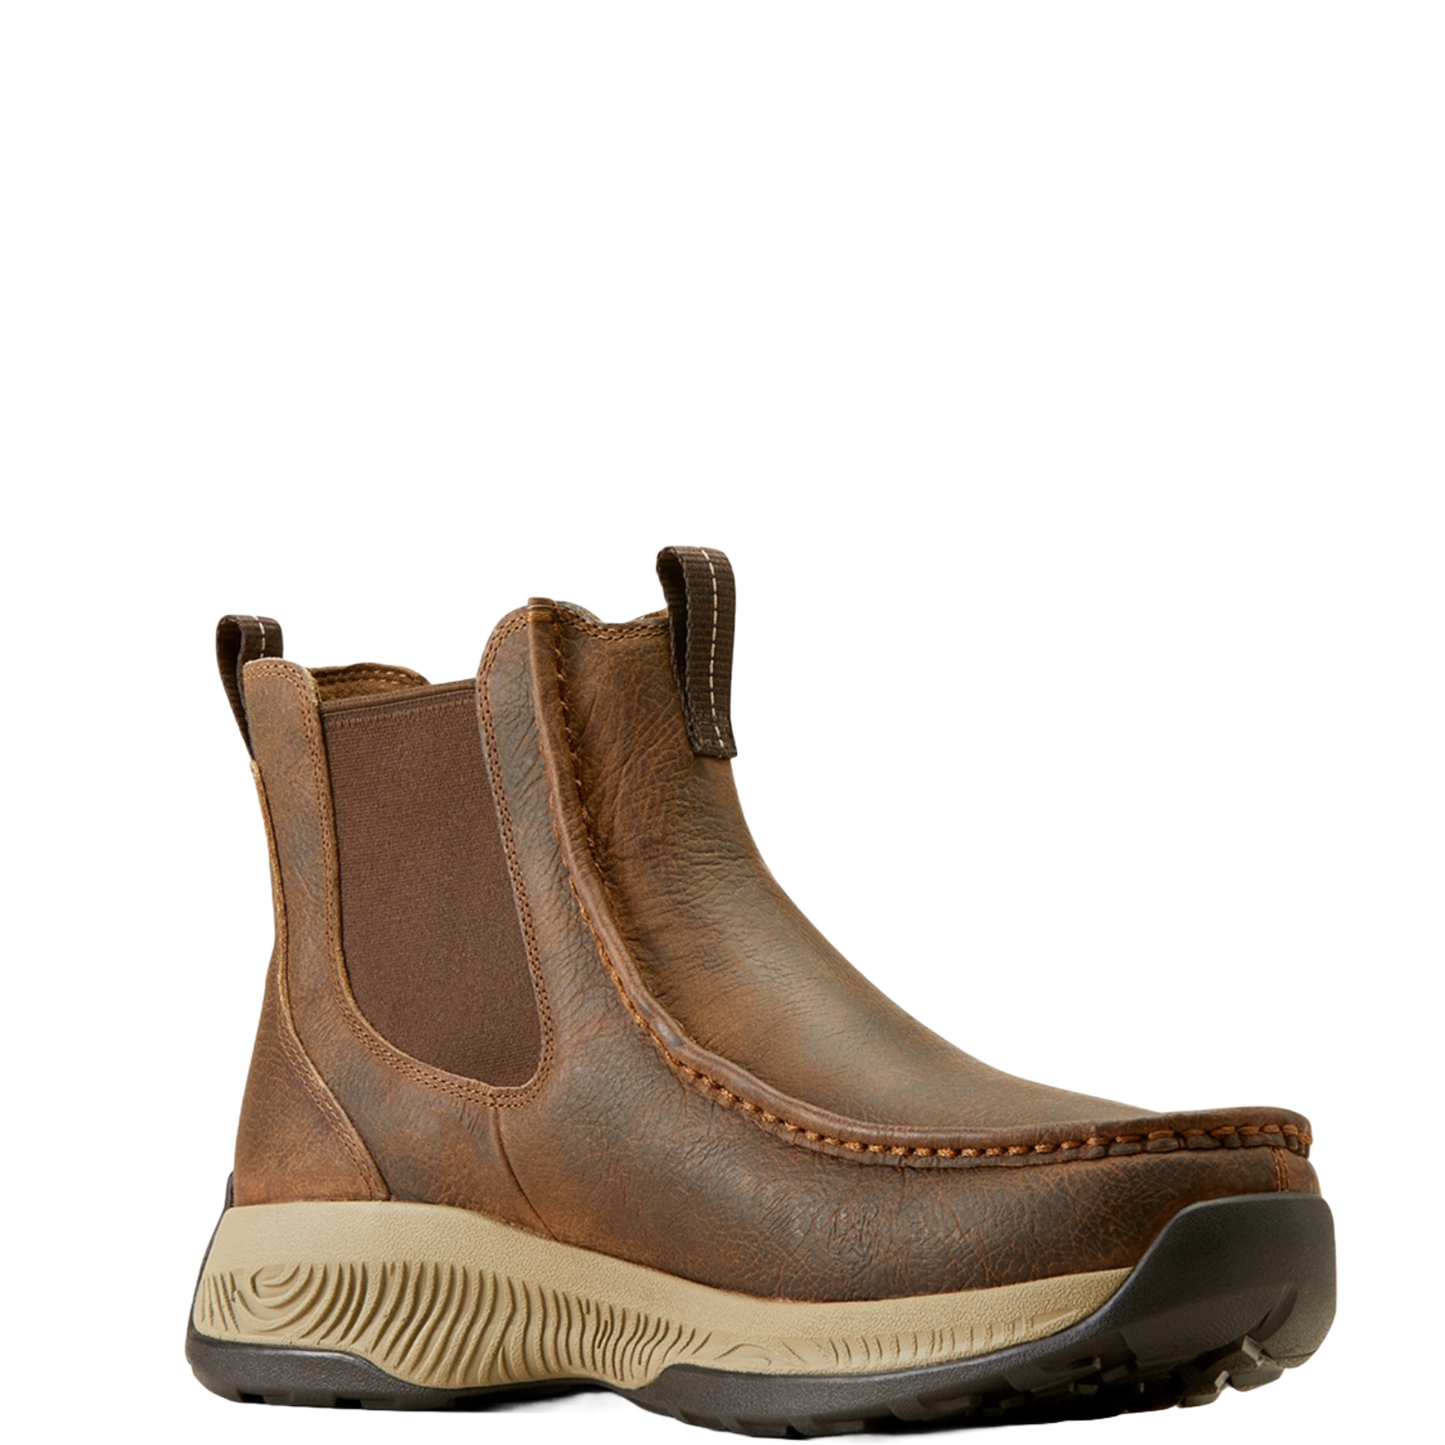 Ariat Men's Spitfire All Terrain Wiley Tan Easy On Shoes 10050981